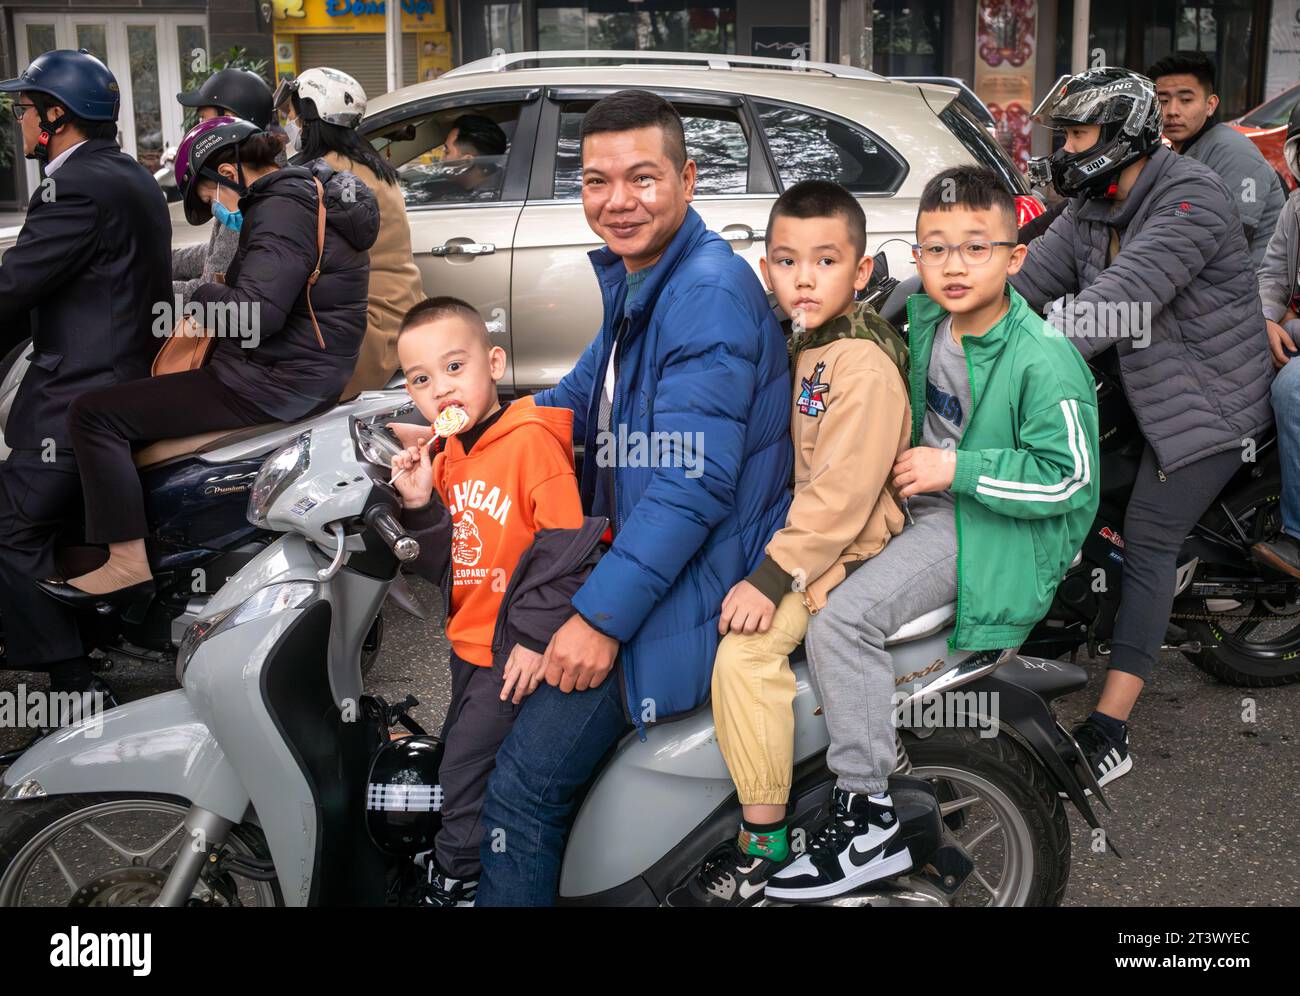 A Vietnamese man and three young boys ride on a motorcycle without helmets at tet, or lunar new year, in Hanoi, Vietnam. Stock Photo